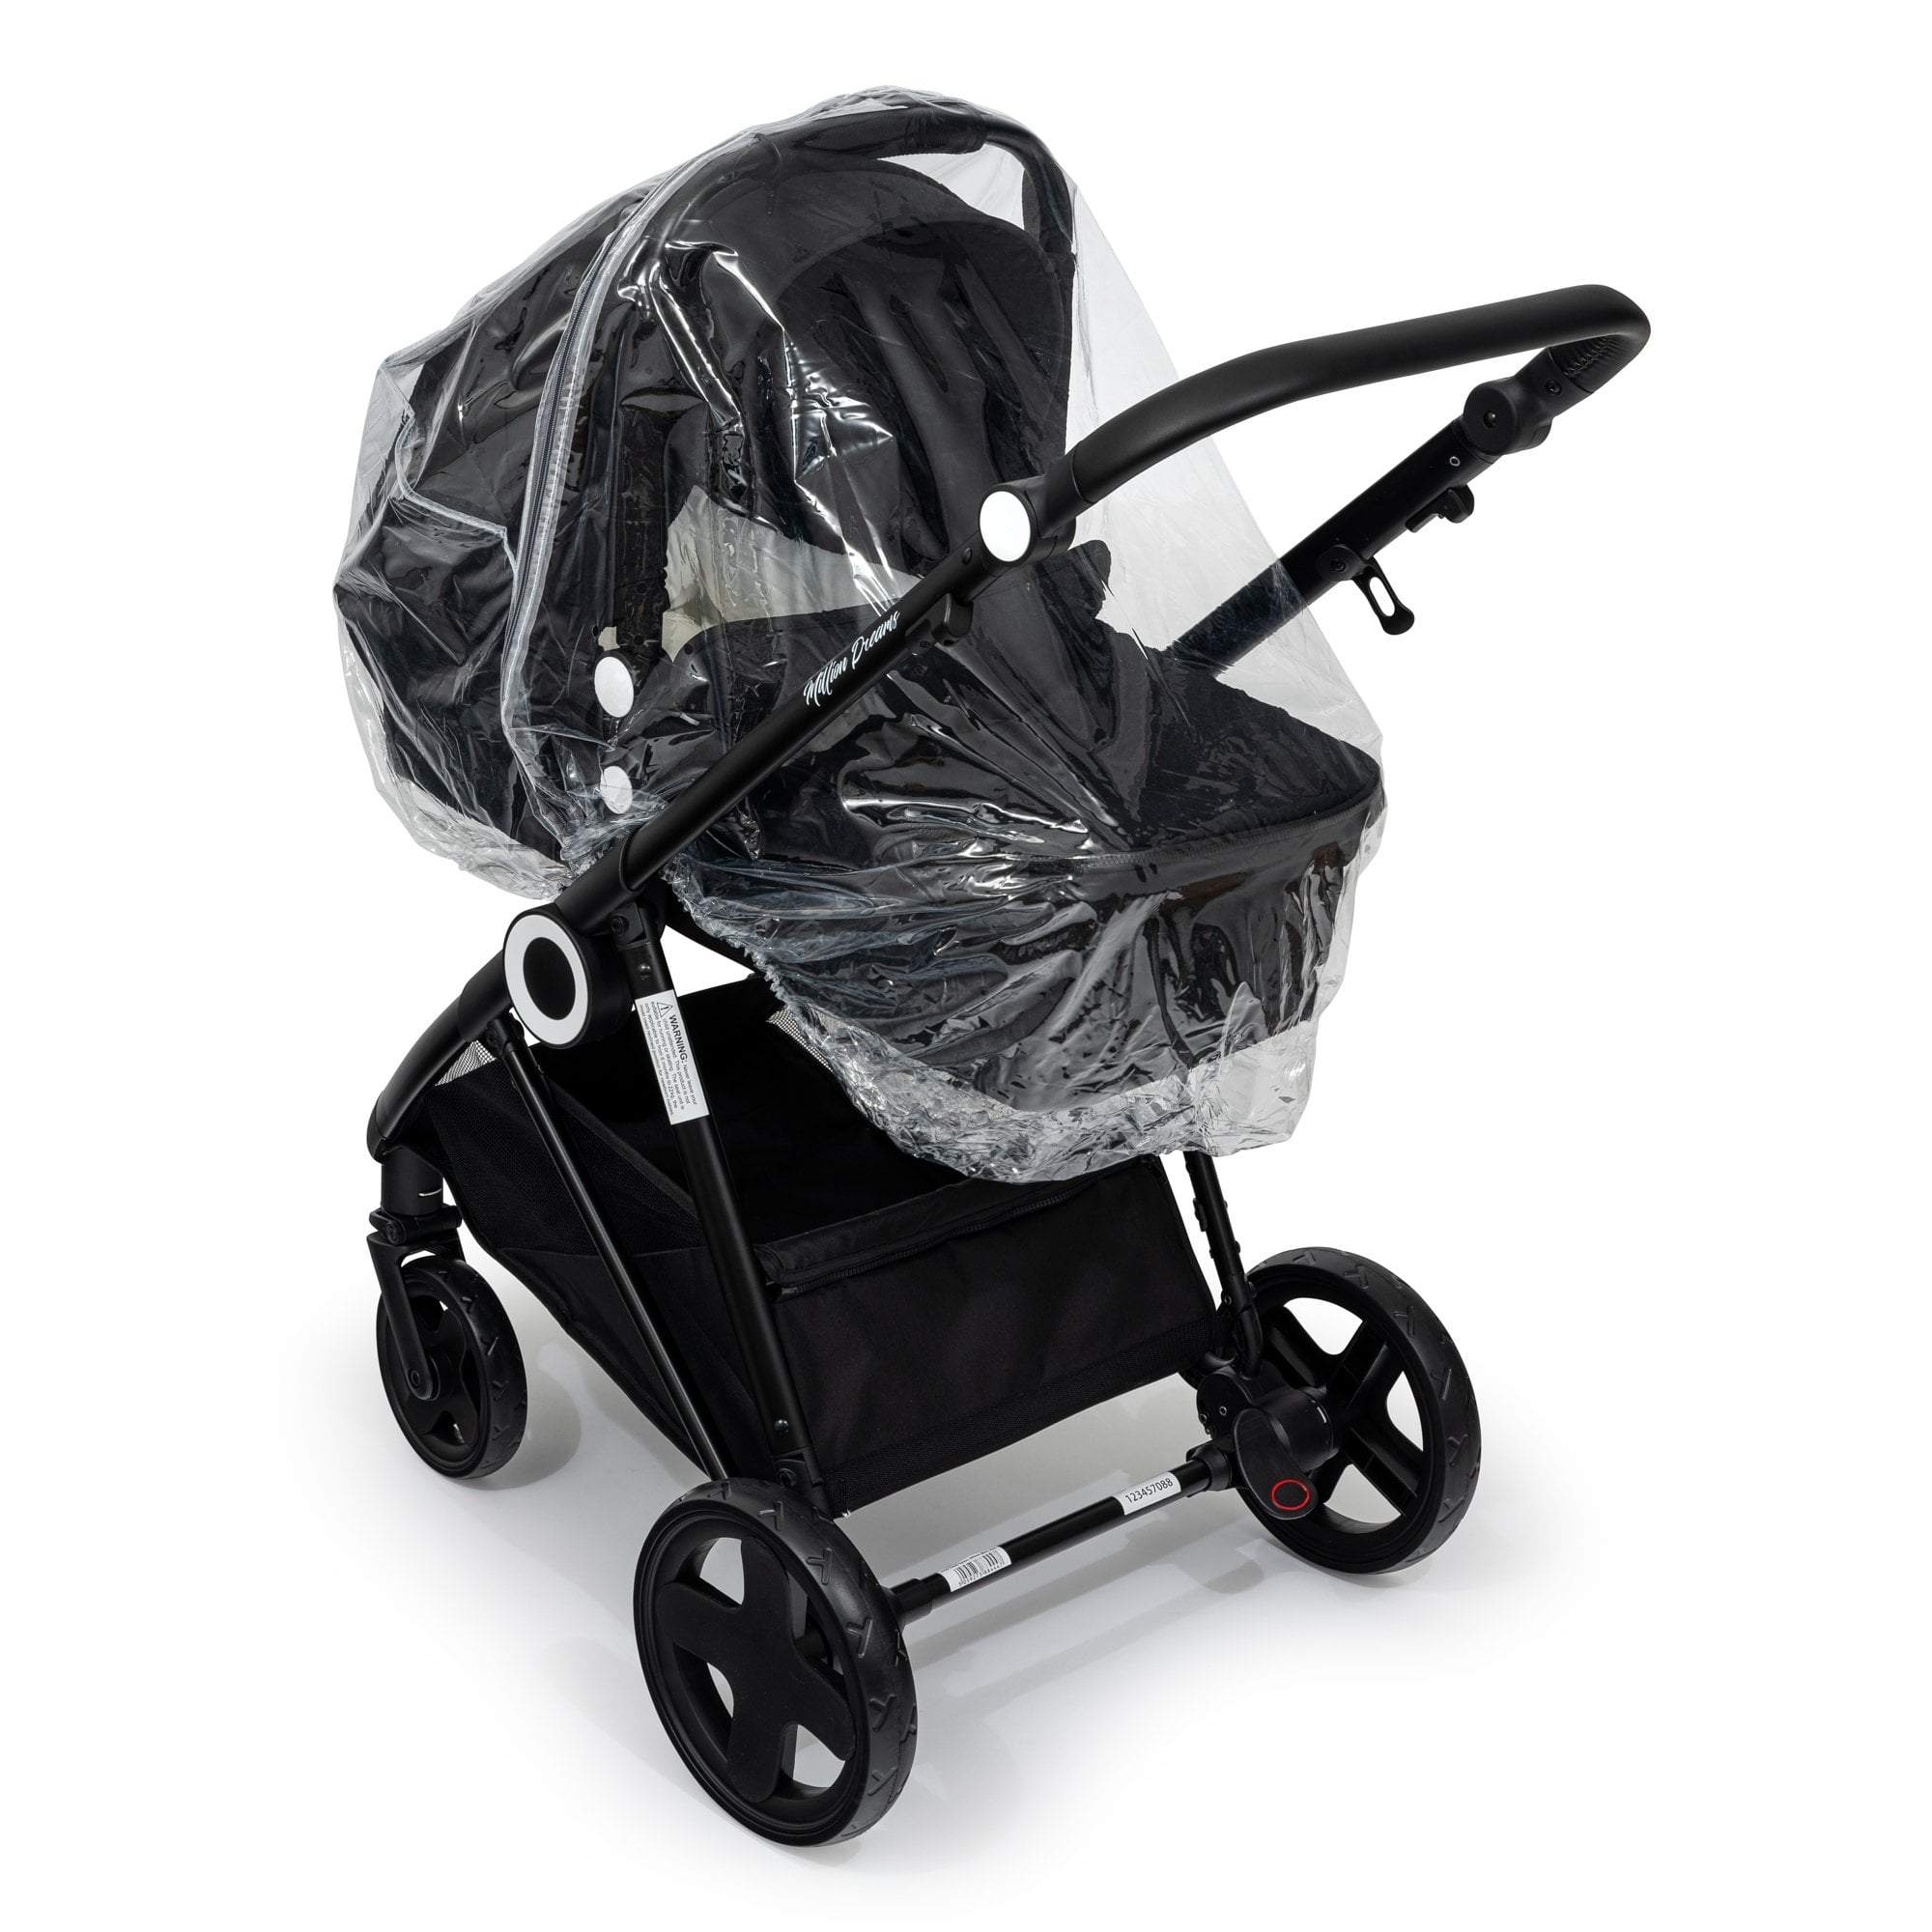 Carrycot Raincover Compatible With Tippitoes - Fits All Models - For Your Little One